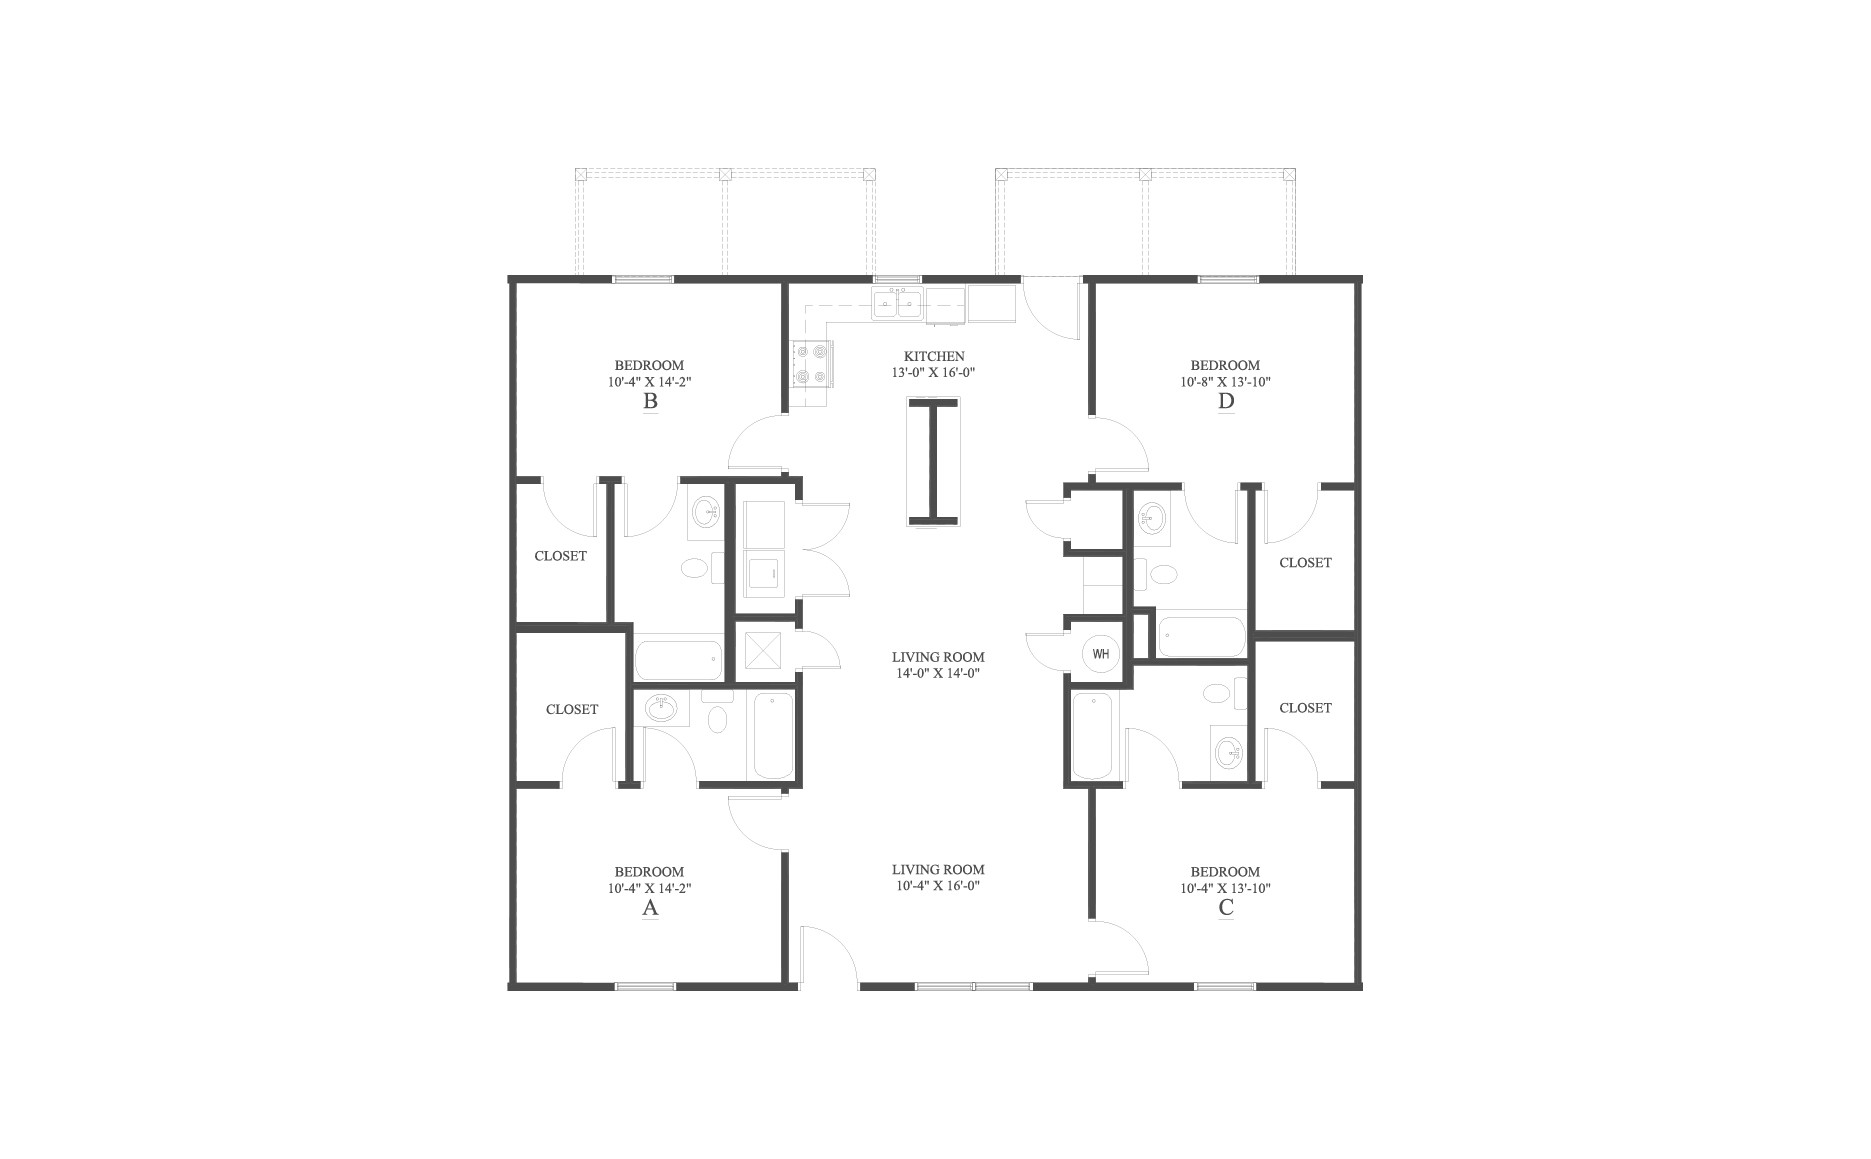 The 4 Flat Floor Plan is a 4 bedroom apartment home with a spacious 1440 square feet